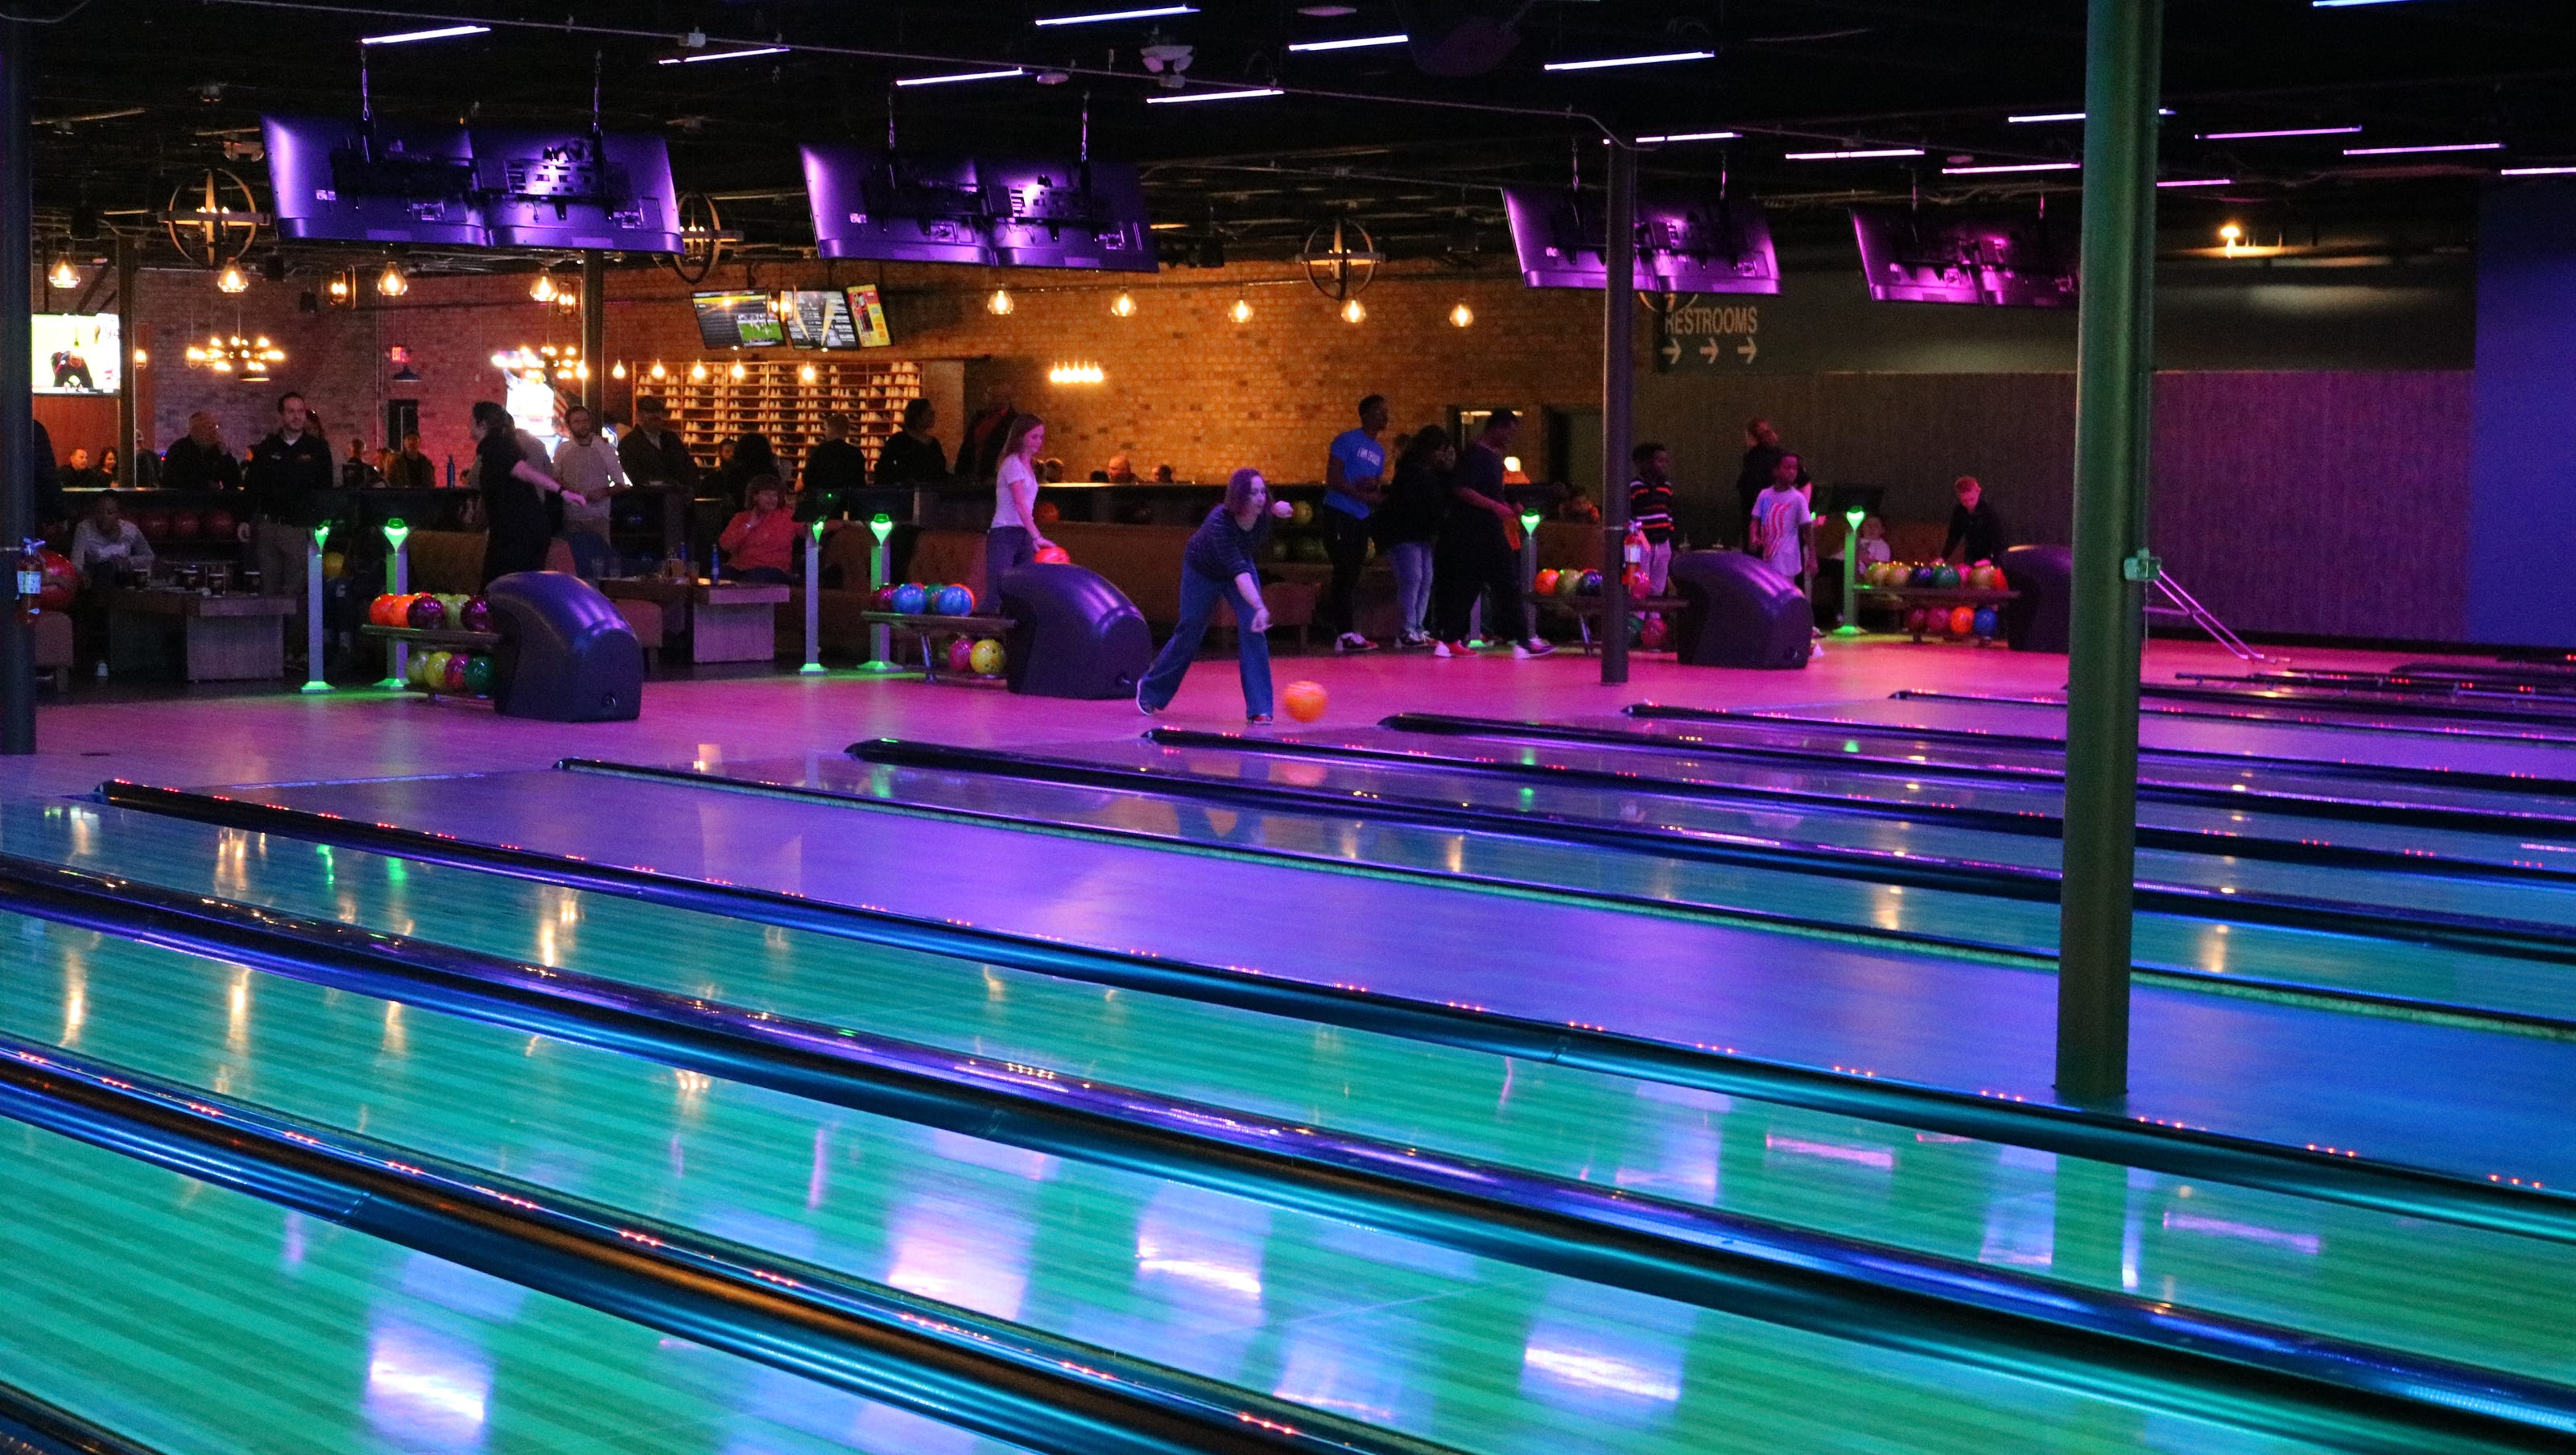 Pin Deck bowling alley in Miami Township set to open Nov. 22